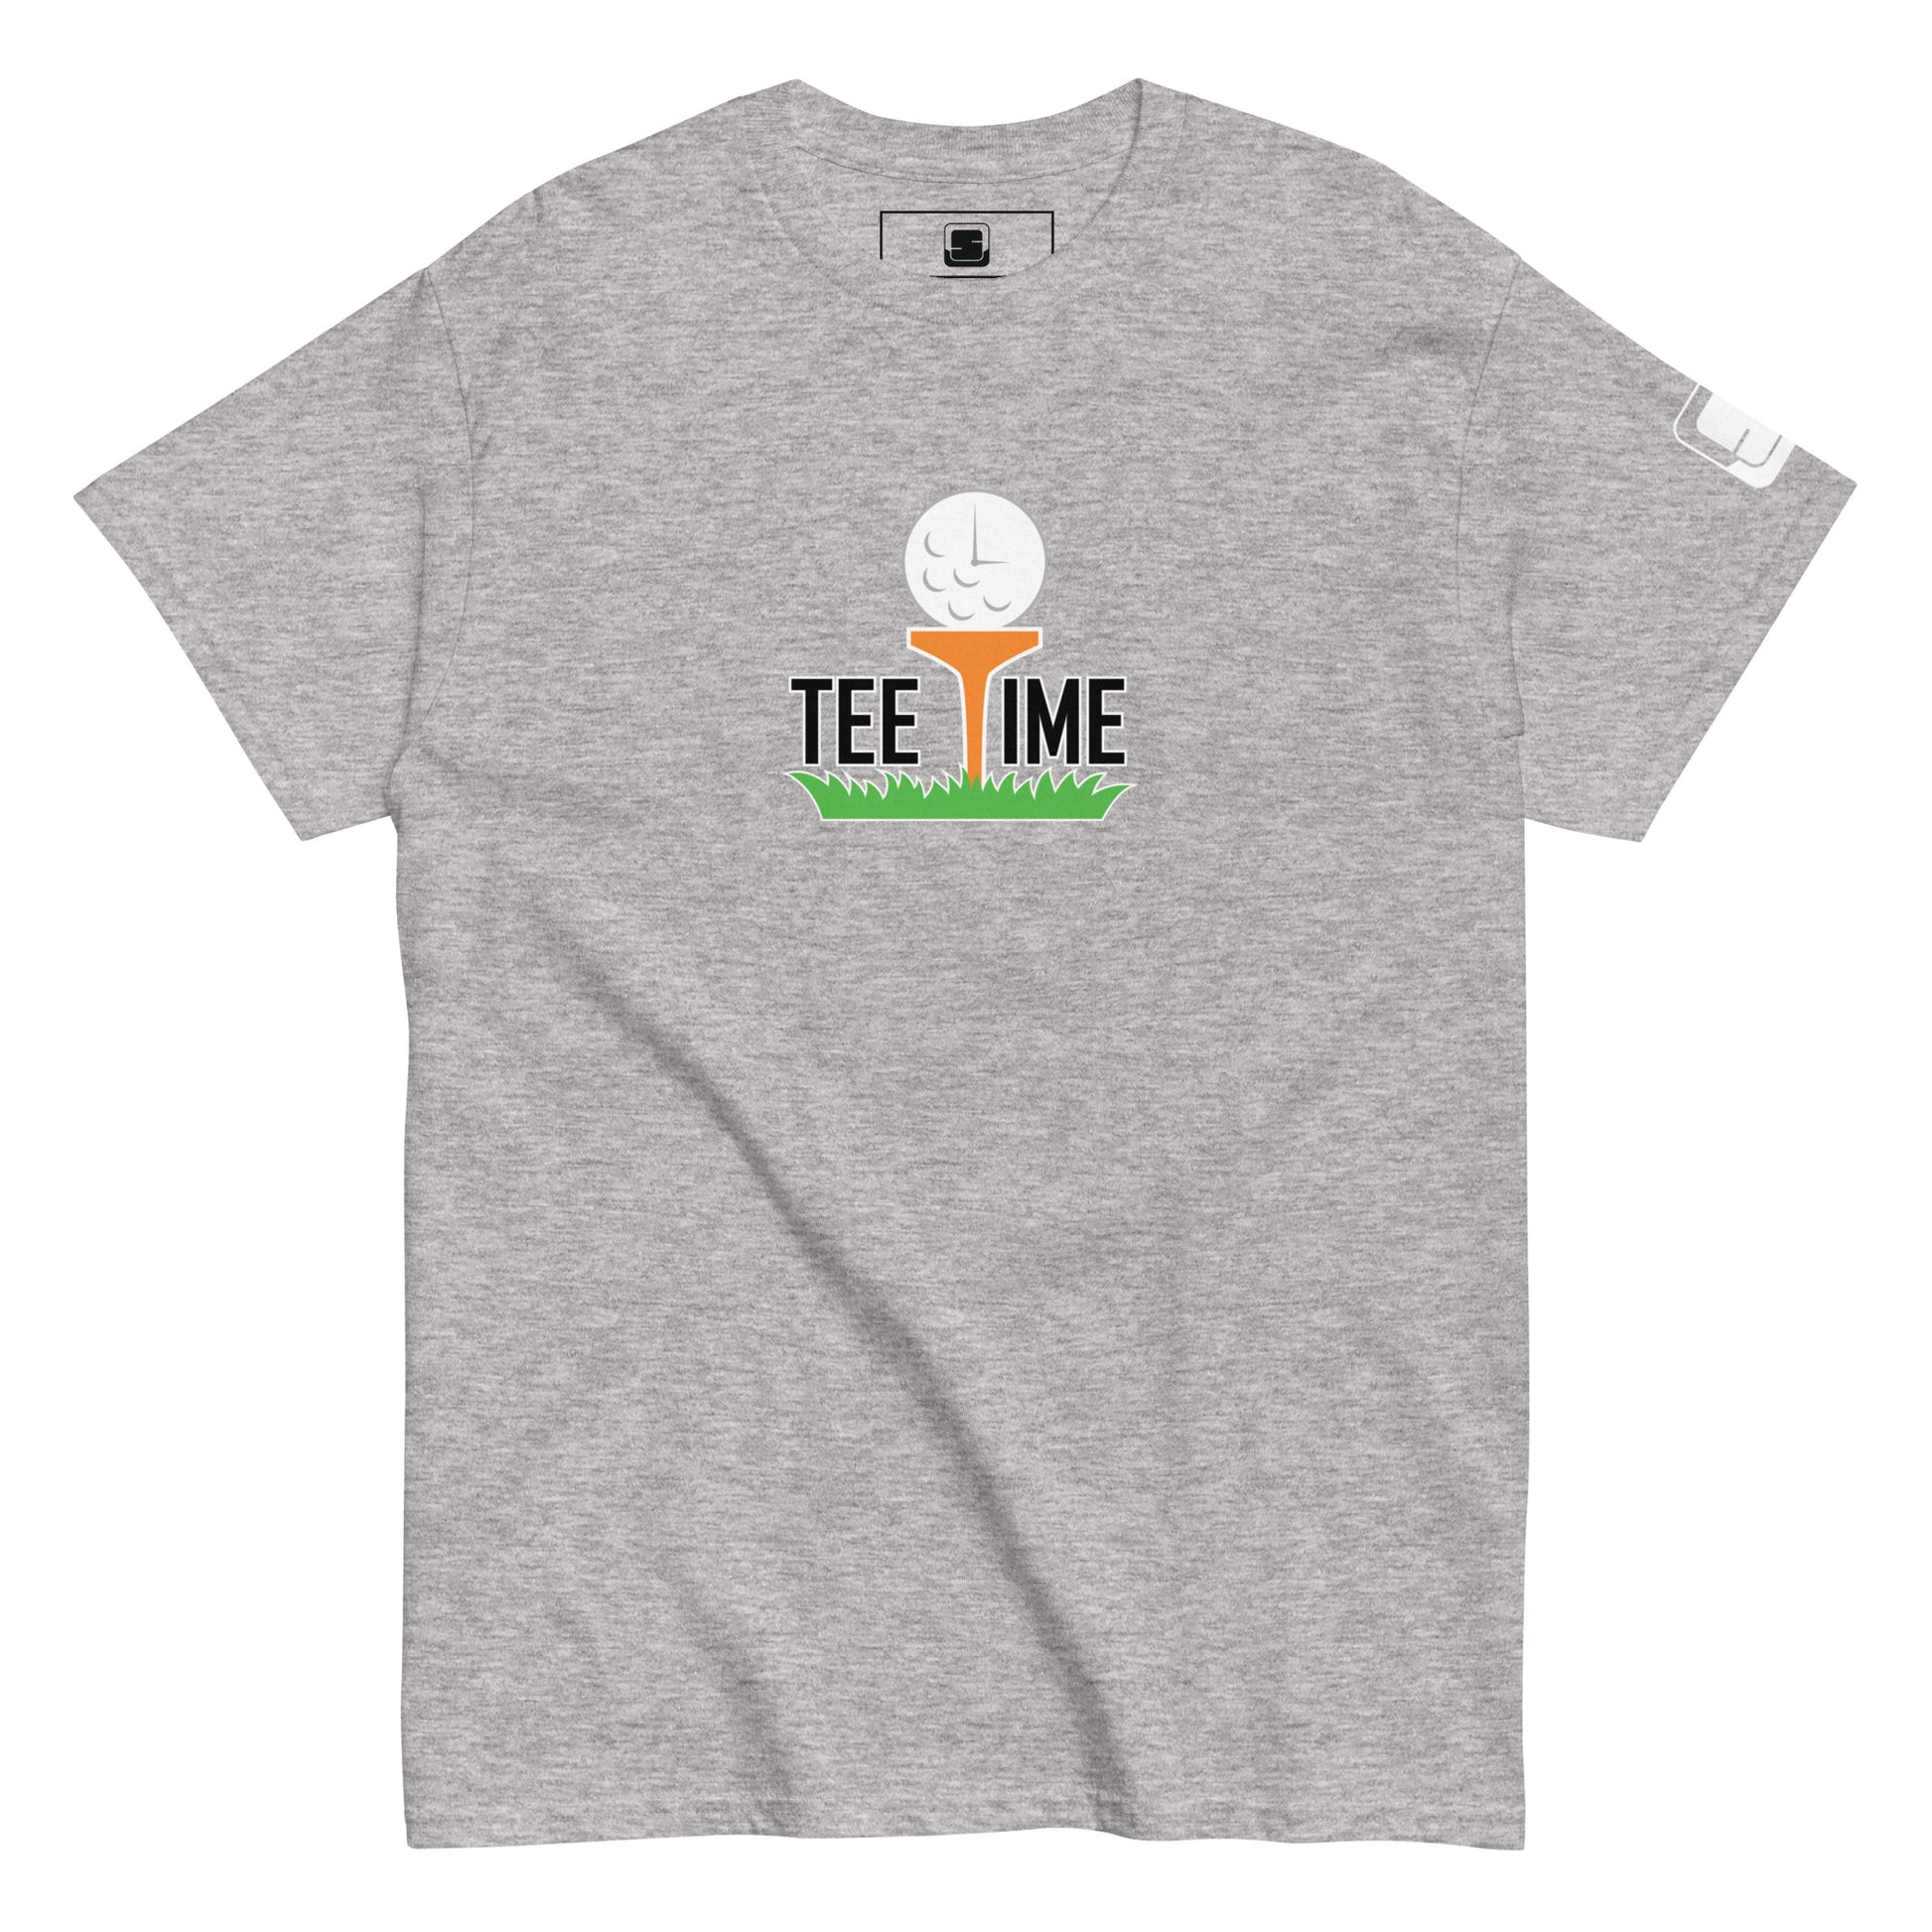  Grey short-sleeved t-shirt with a 'Tee Time' graphic showing a golf ball character on grass on the chest and a small logo patch on the sleeve, against a white background.